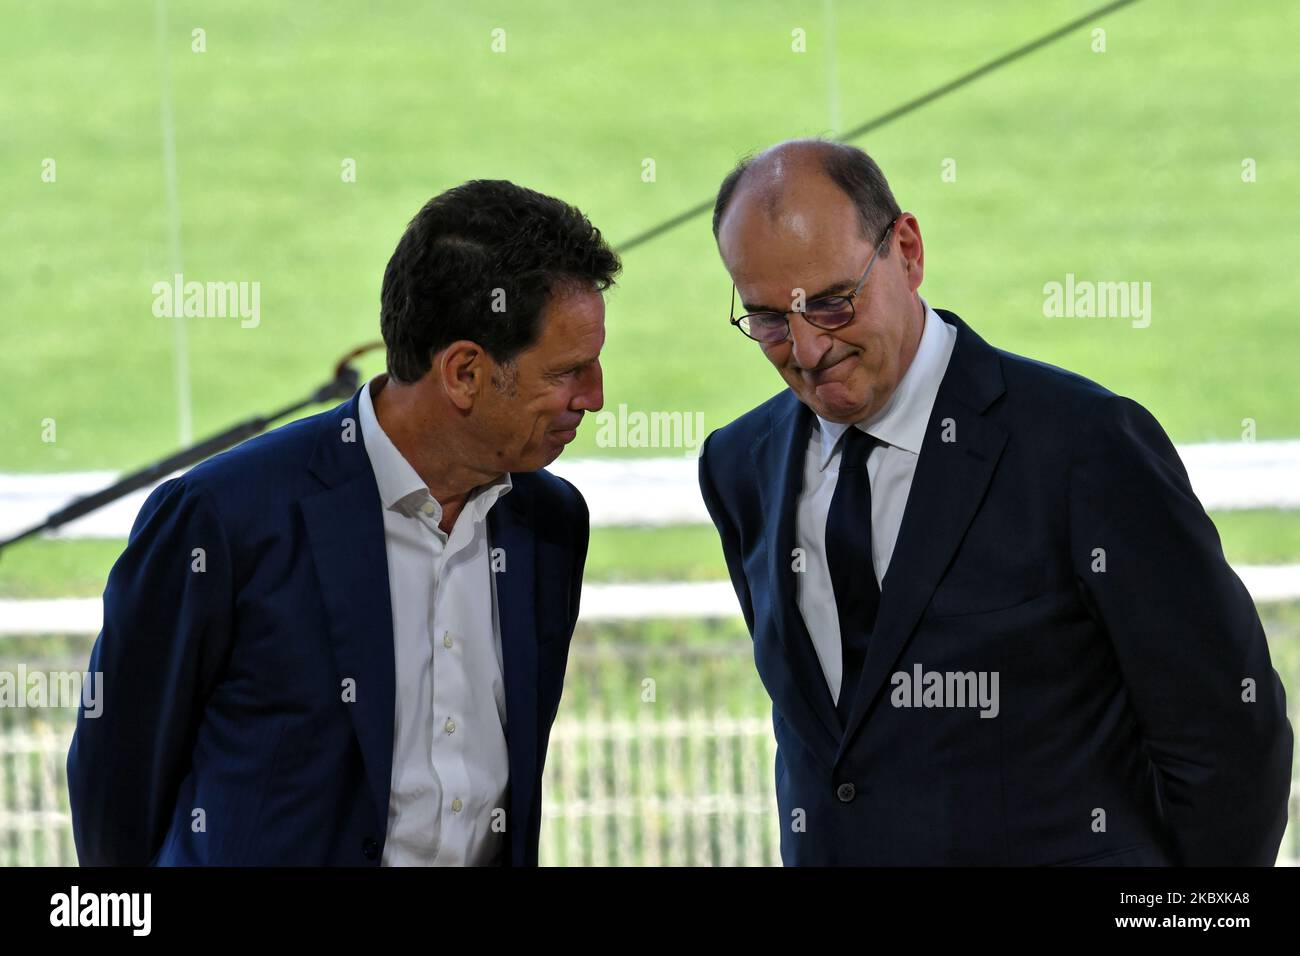 Medef President Geoffroy Roux de Bezieux (L) and French Prime Minister Jean Castex (R) speak during the meeting of French employers' association Medef themed 'The Renaissance of French Companies' on August 26, 2020, in Paris, France. (Photo by Daniel Pier/NurPhoto) Stock Photo